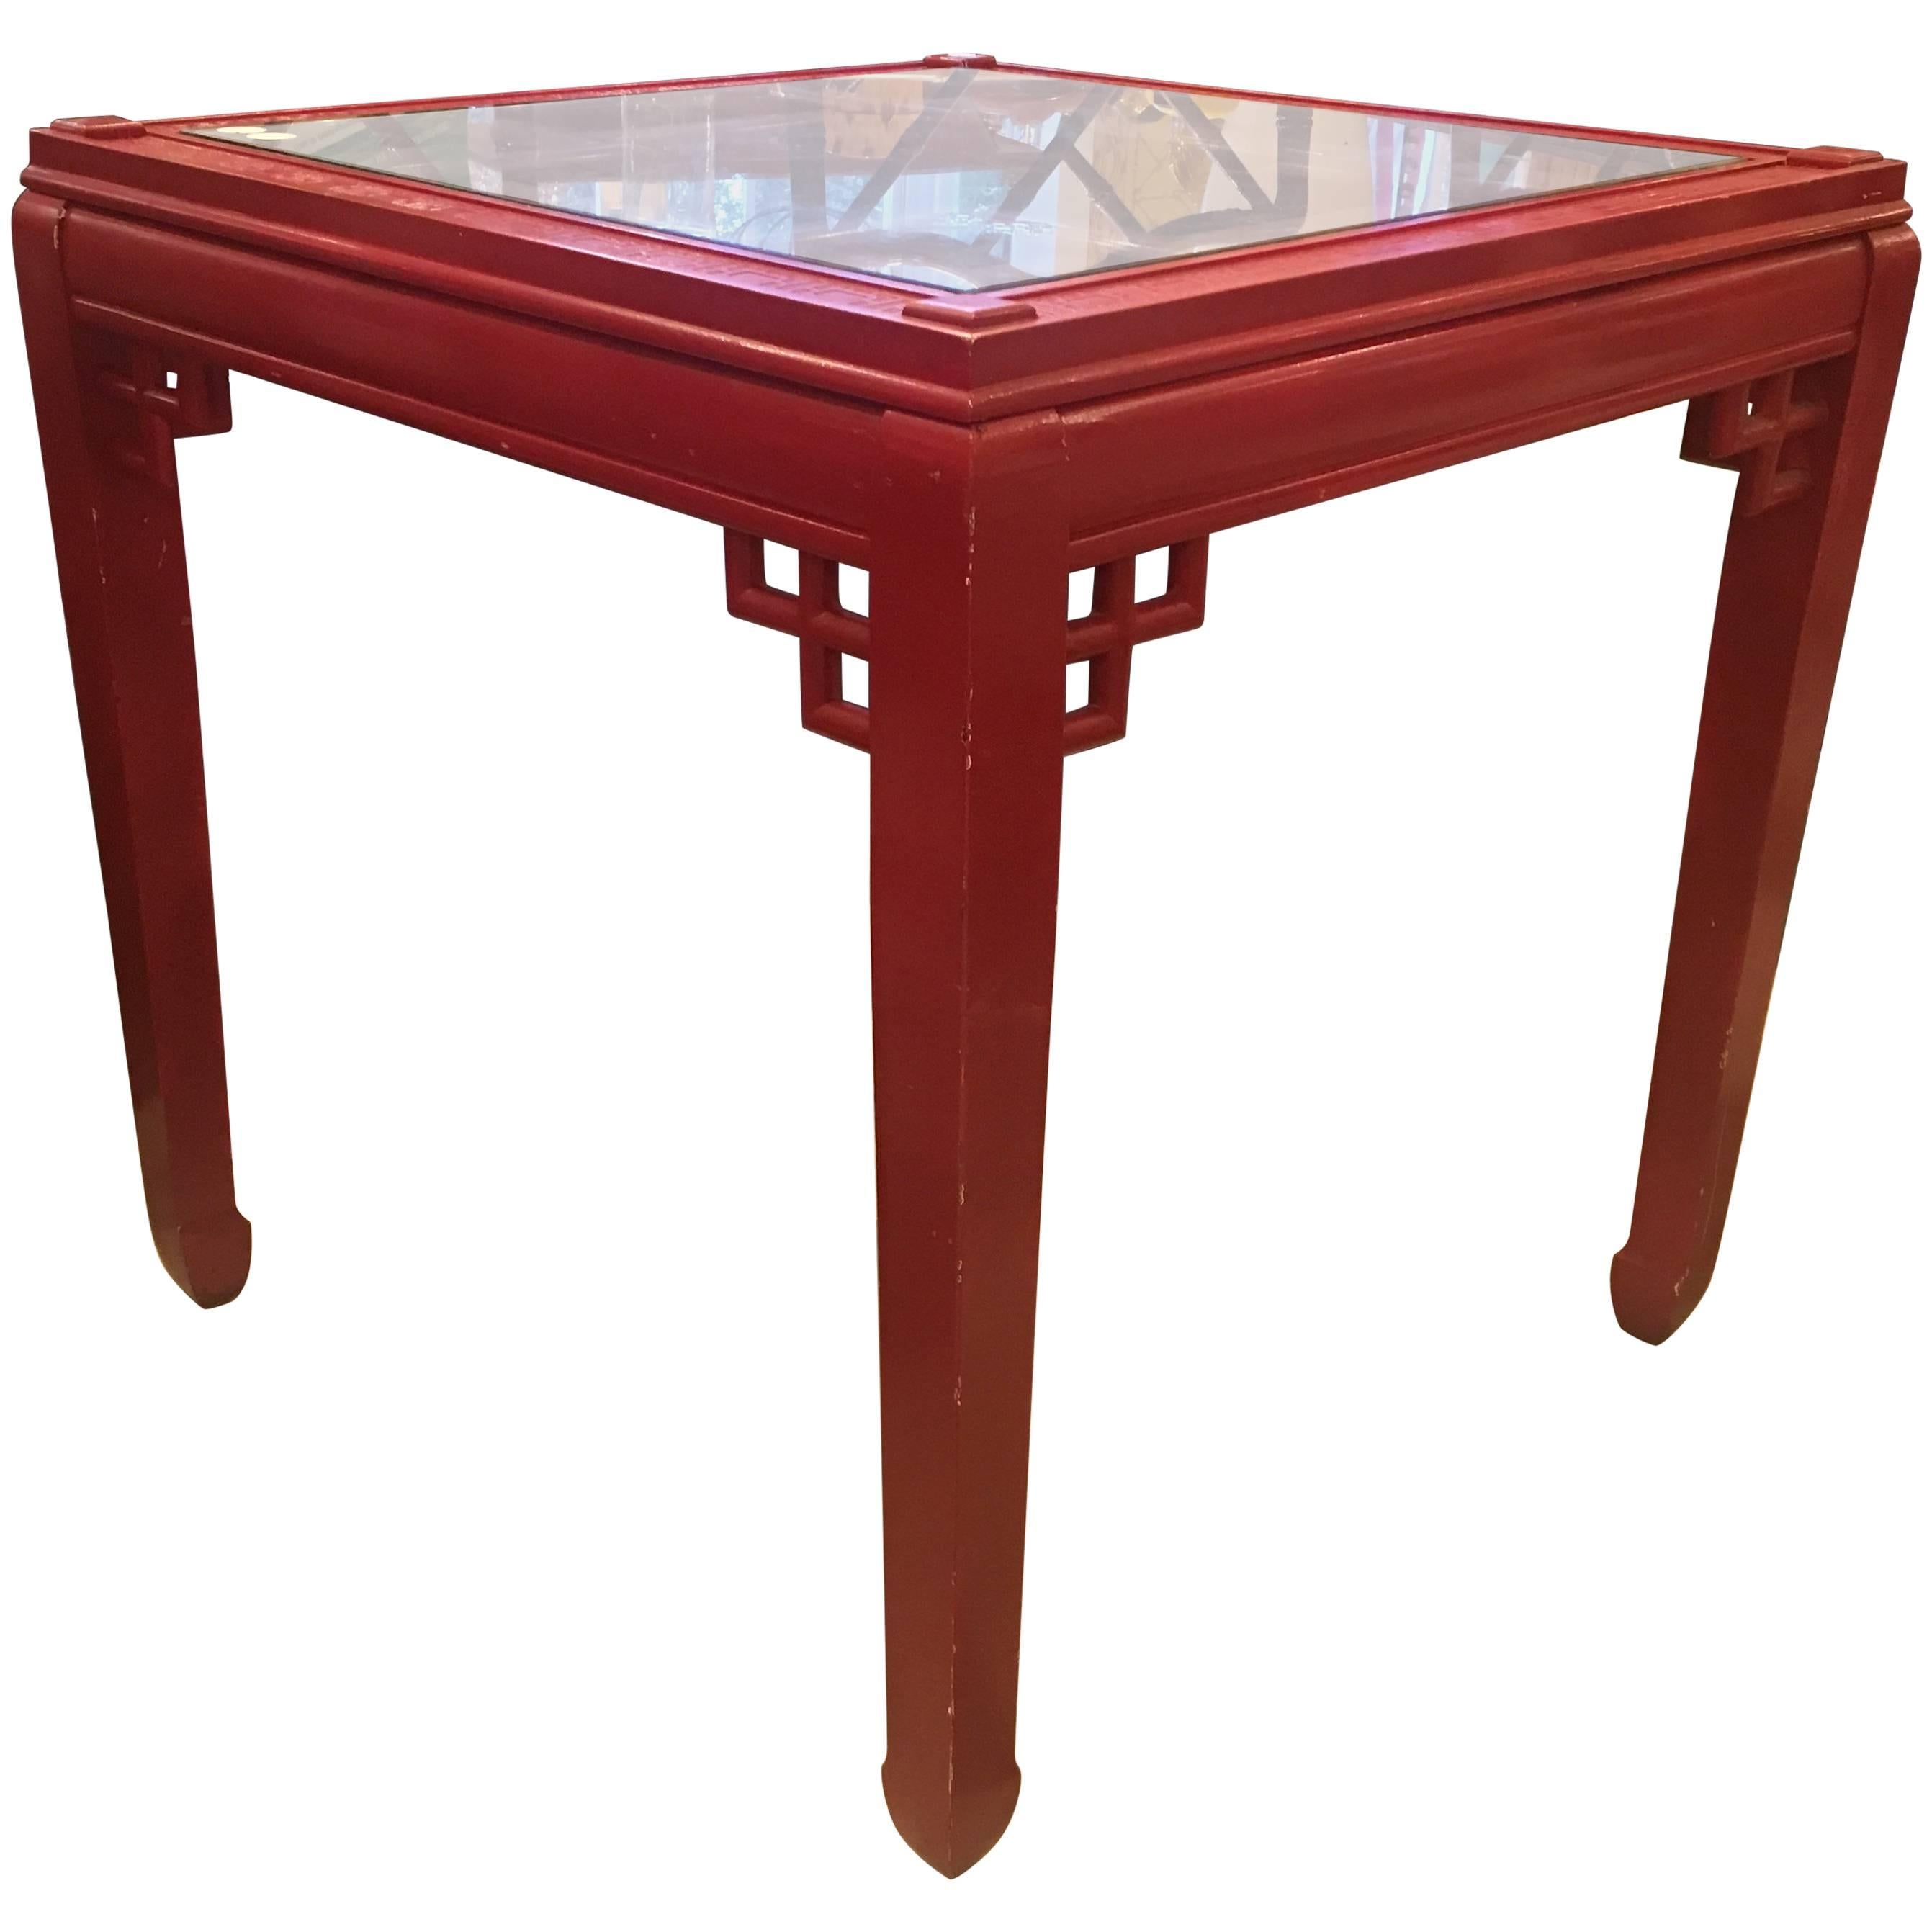 Midcentury American Chinese Chippendale style red lacquered square table.